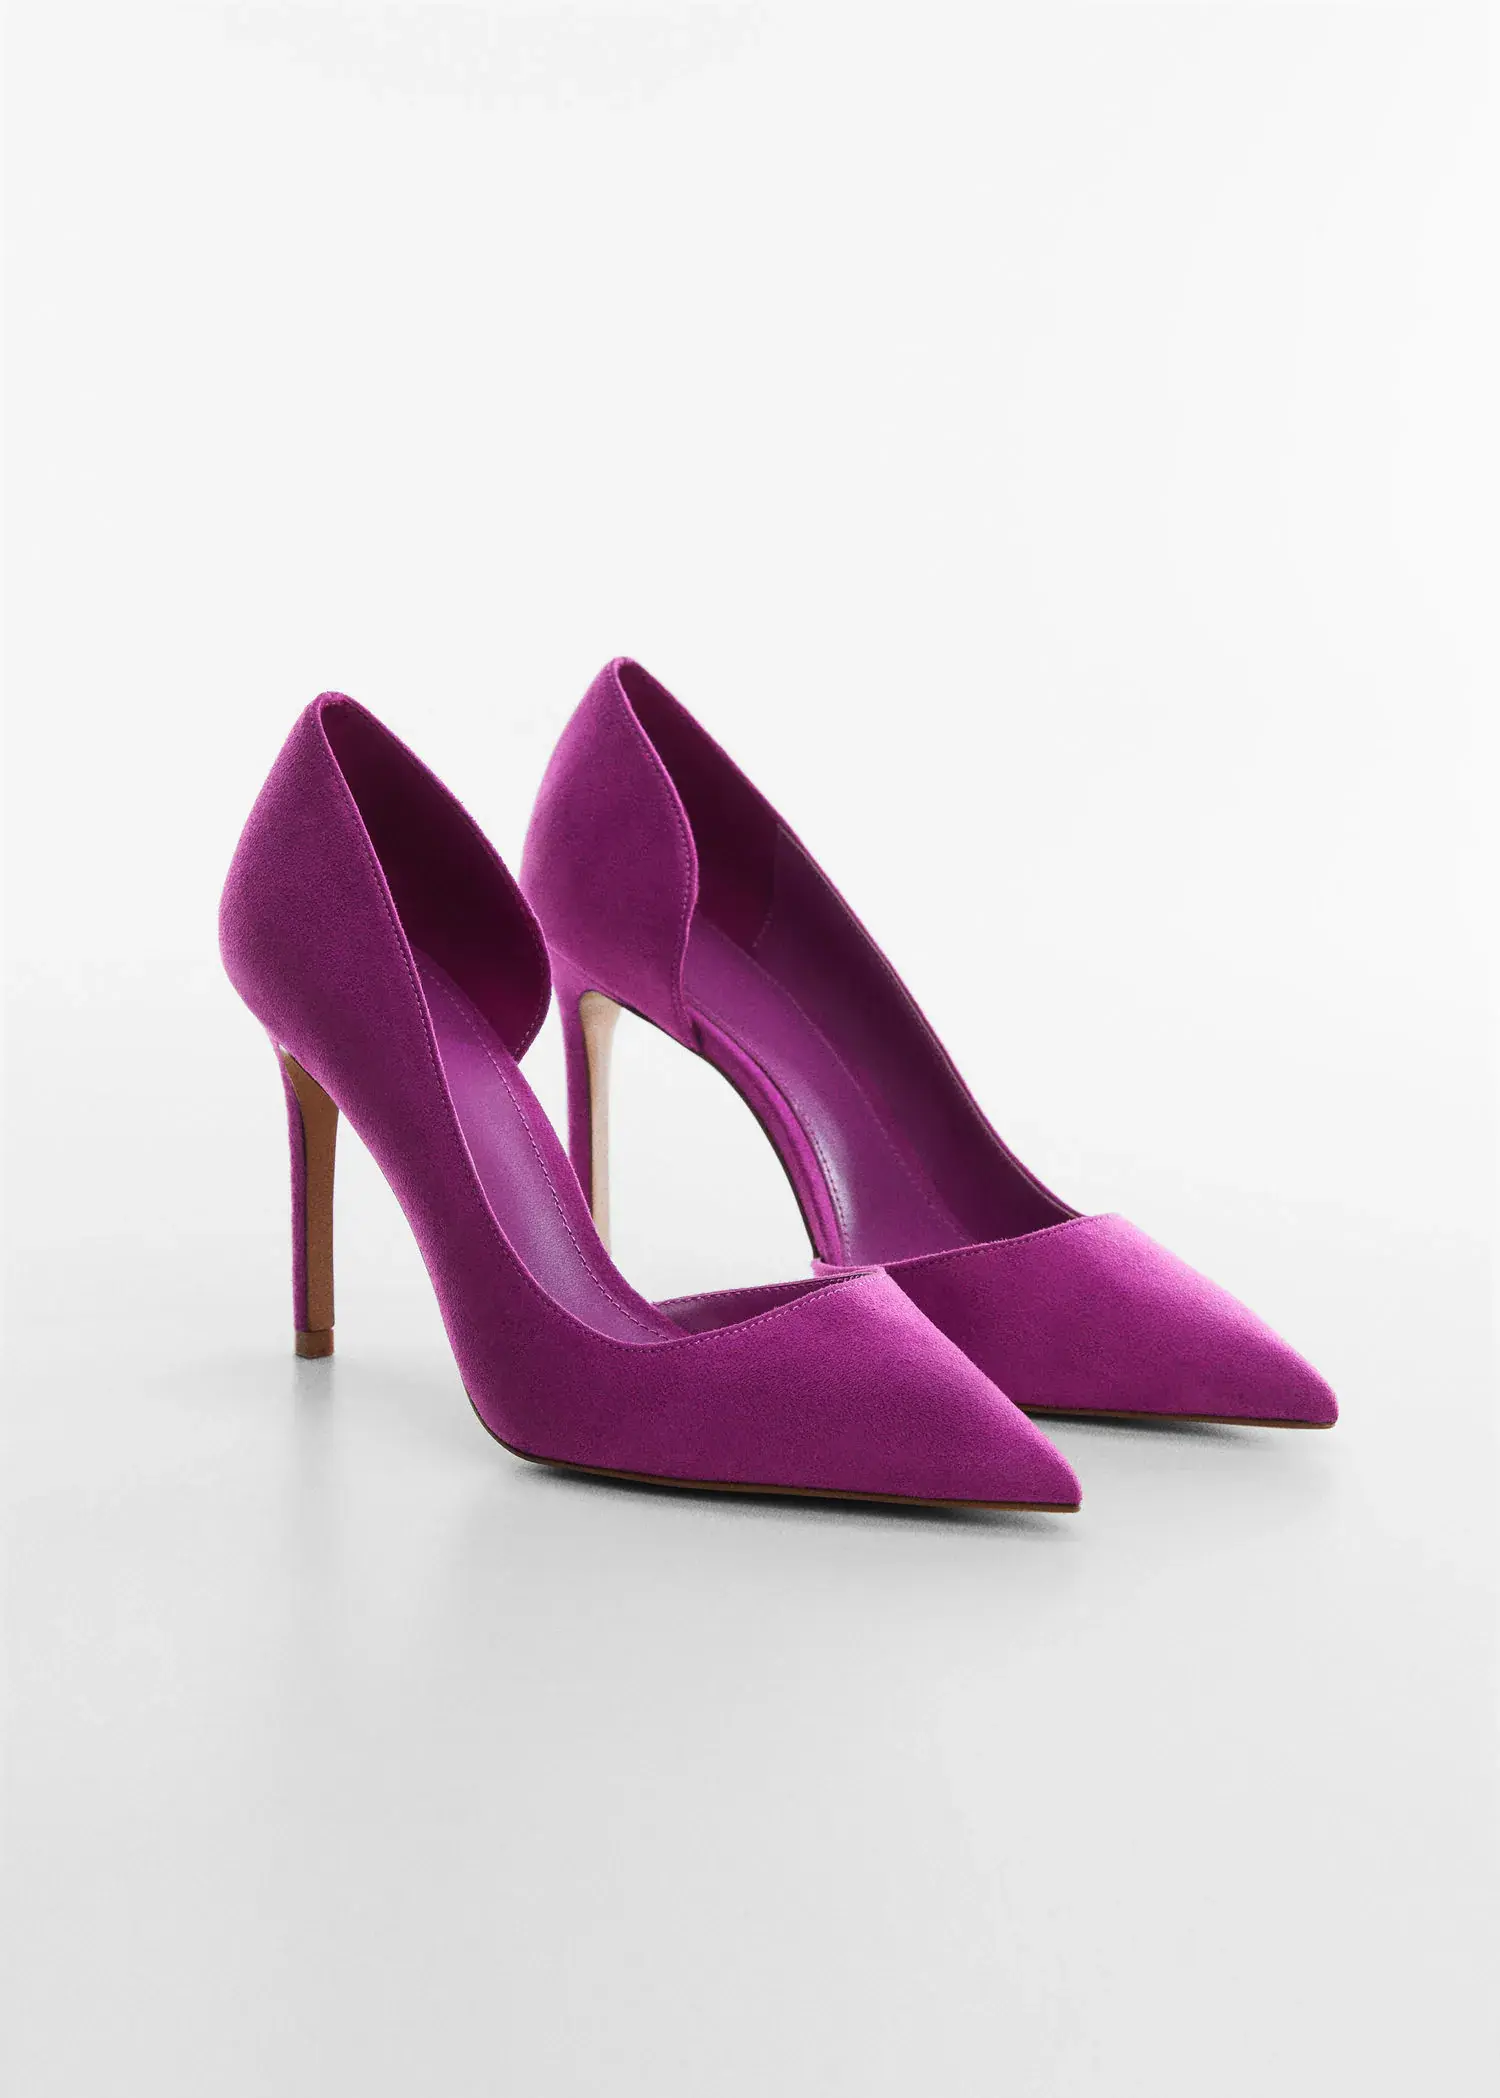 Mango Asymmetrical heeled shoes. a pair of purple high heels sitting on top of a table. 